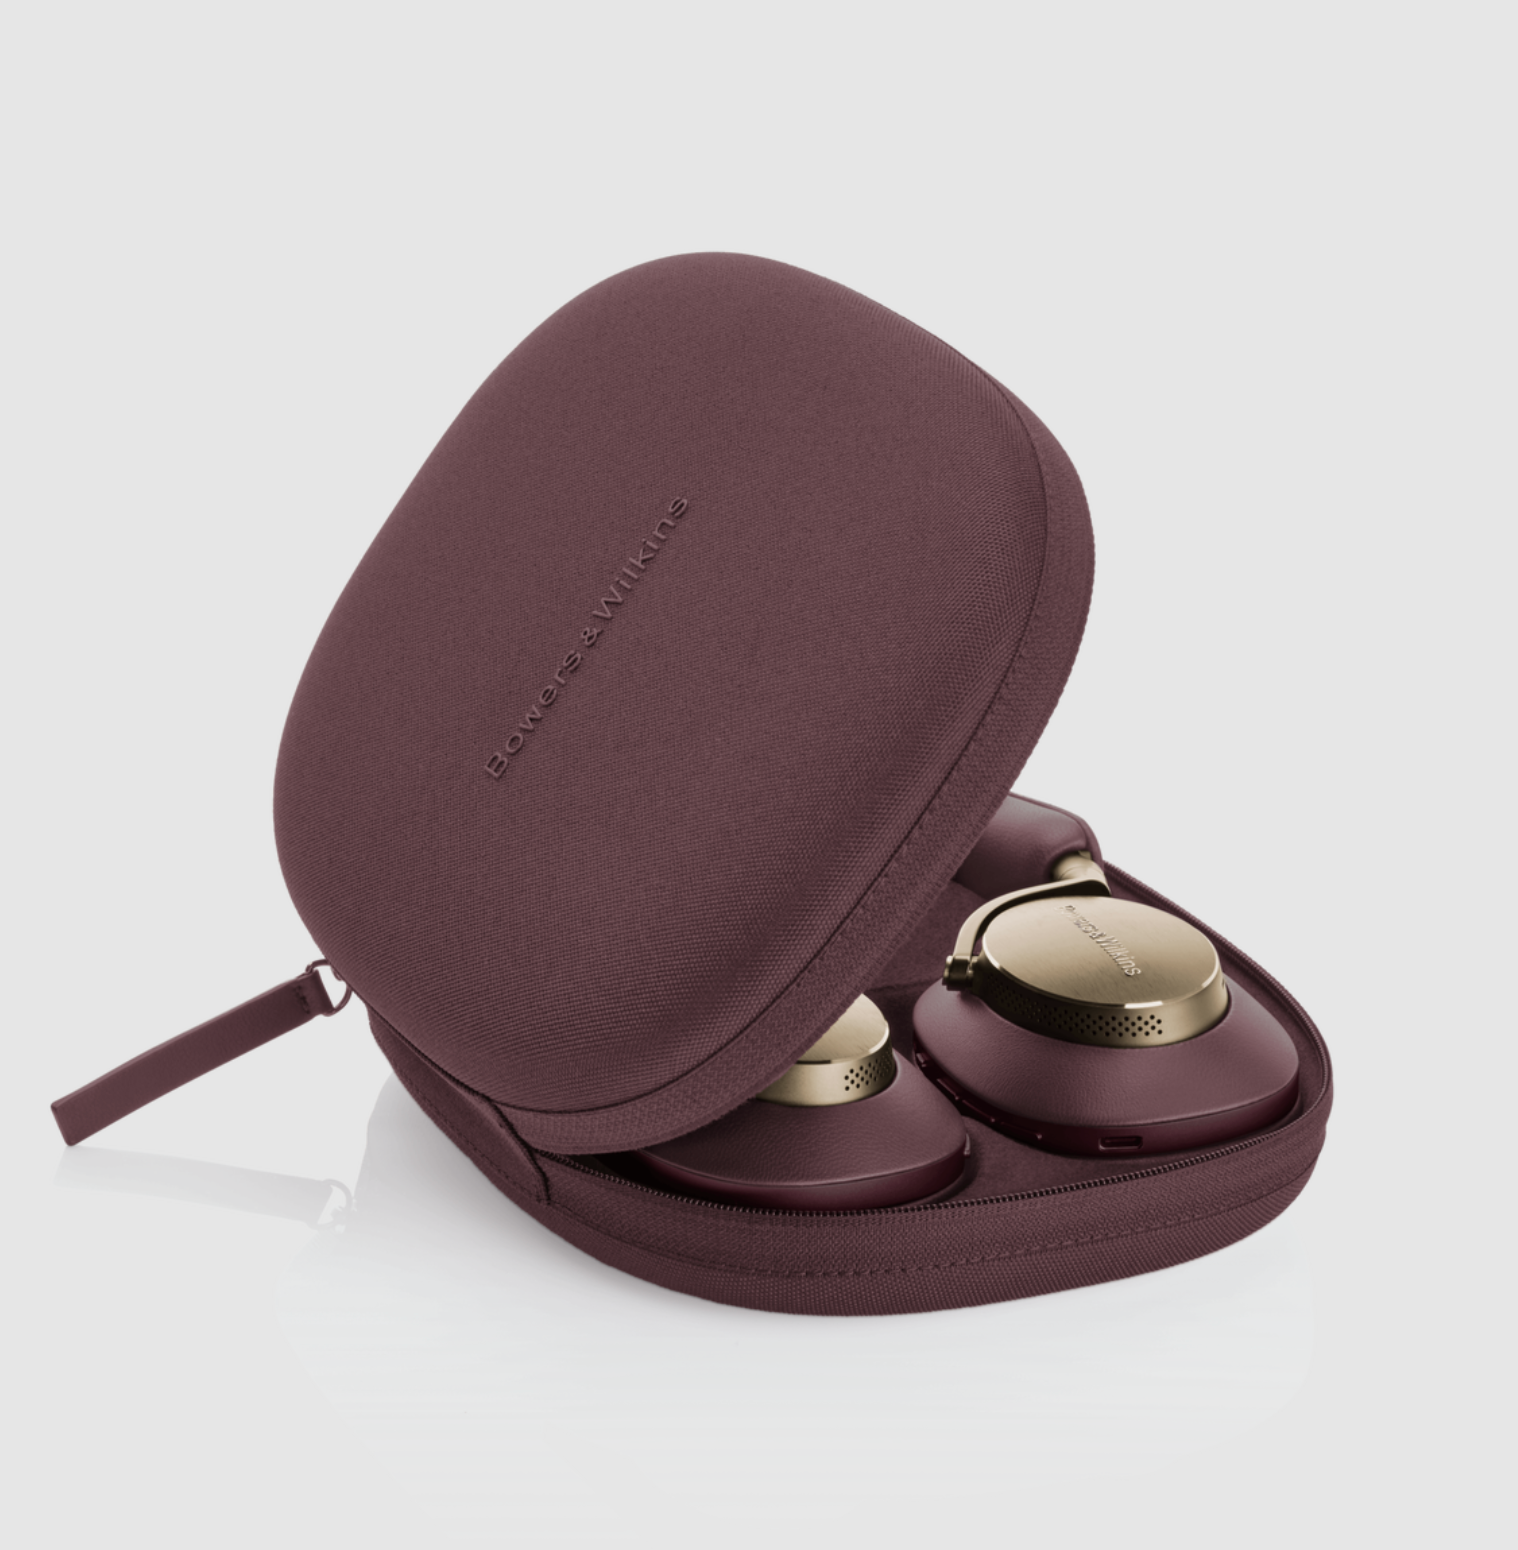 B&W Px8 Noise Cancelling Headphones in Royal Burgundy. Image of case